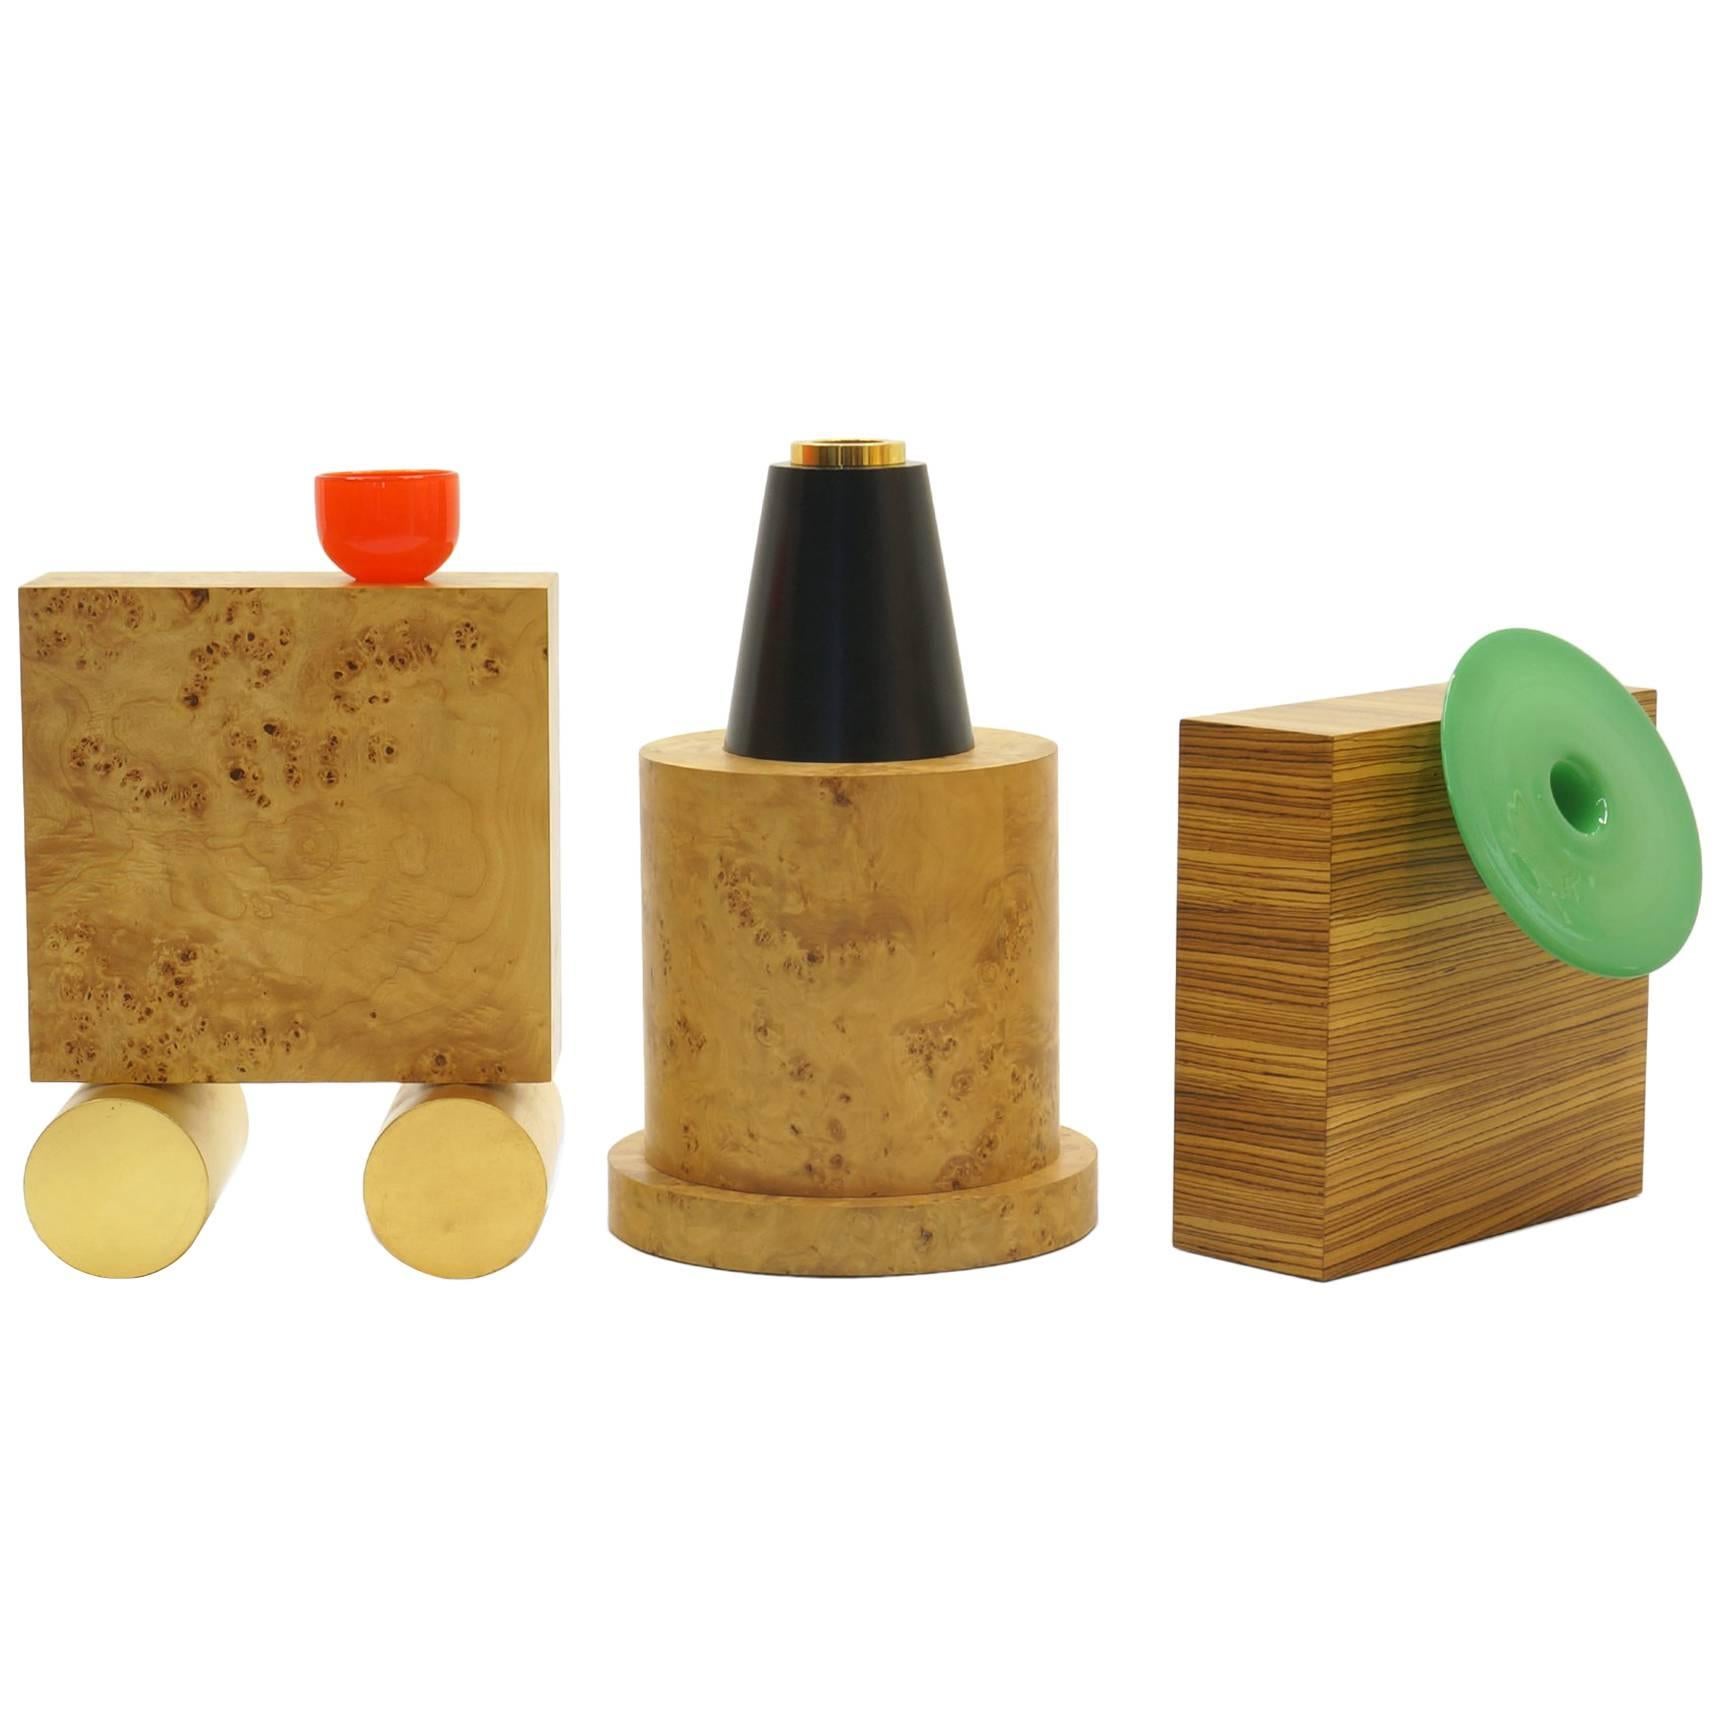 Ettore Sottsass Vases from 27 Woods for a Chinese Artificial Flower